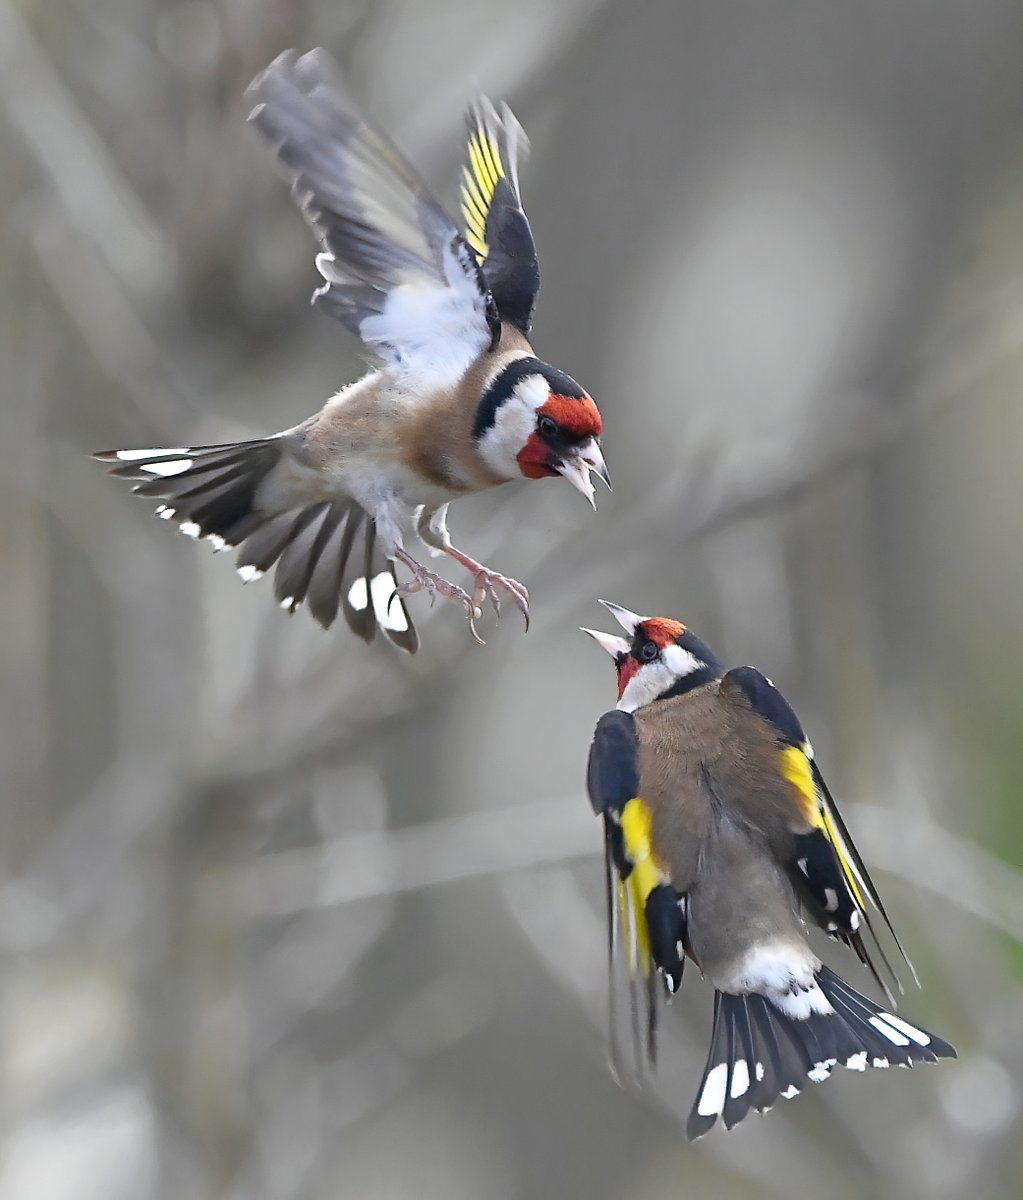 It's Friday! 😀 Once again, I'm asking my dear followers to please retweet this photo if you see it! 🙏 This is to help my account be seen by the people who actually follow me.🐦 To make it worth sharing, here are a pair of bickering Goldfinches!😊♥️ #FridayRetweetPlease ♥️